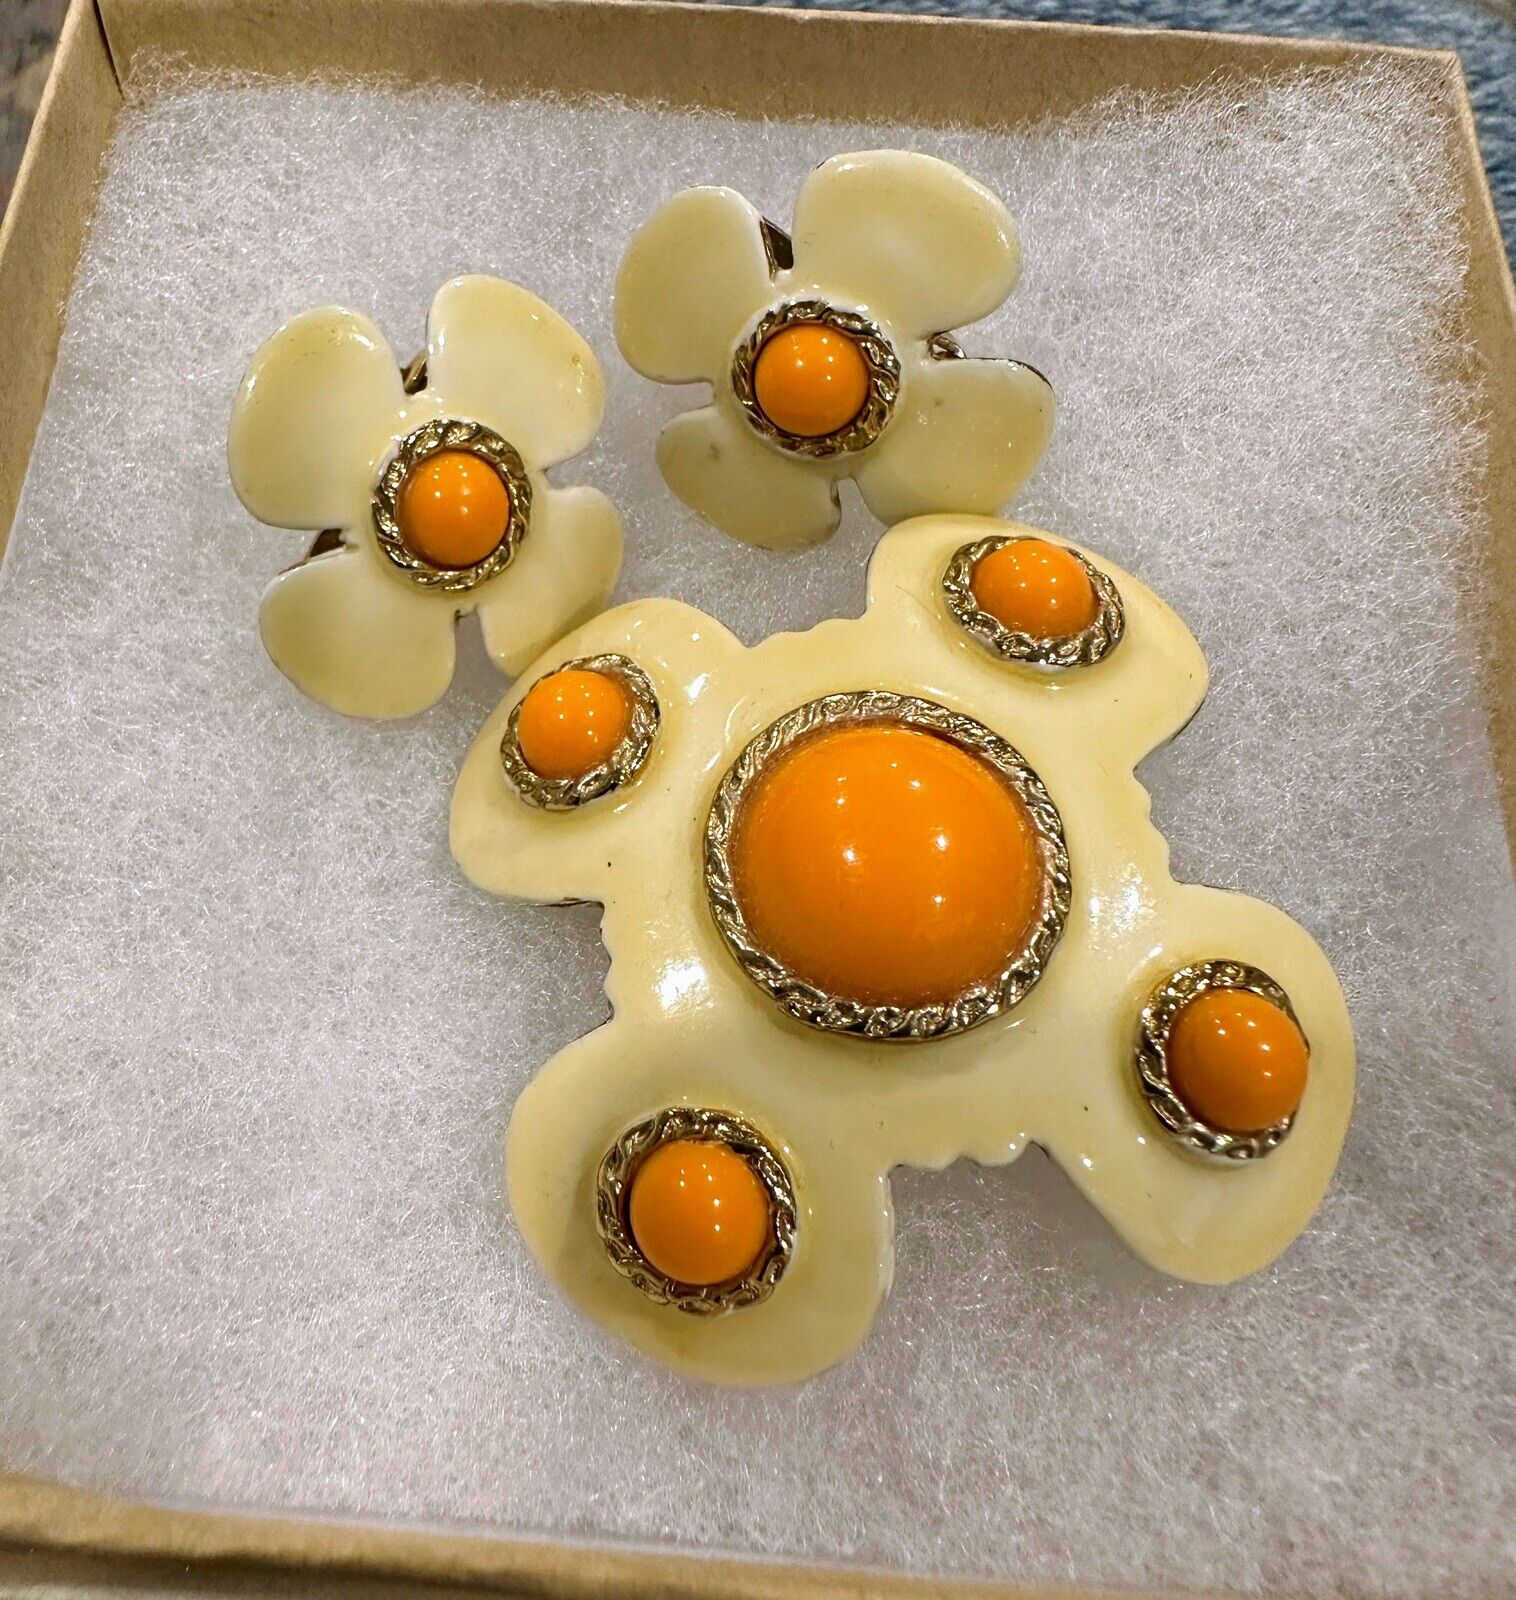 HOBE Brooch & Earrings Yellow  Petals With Cabochon Orange Center Vintage RARE